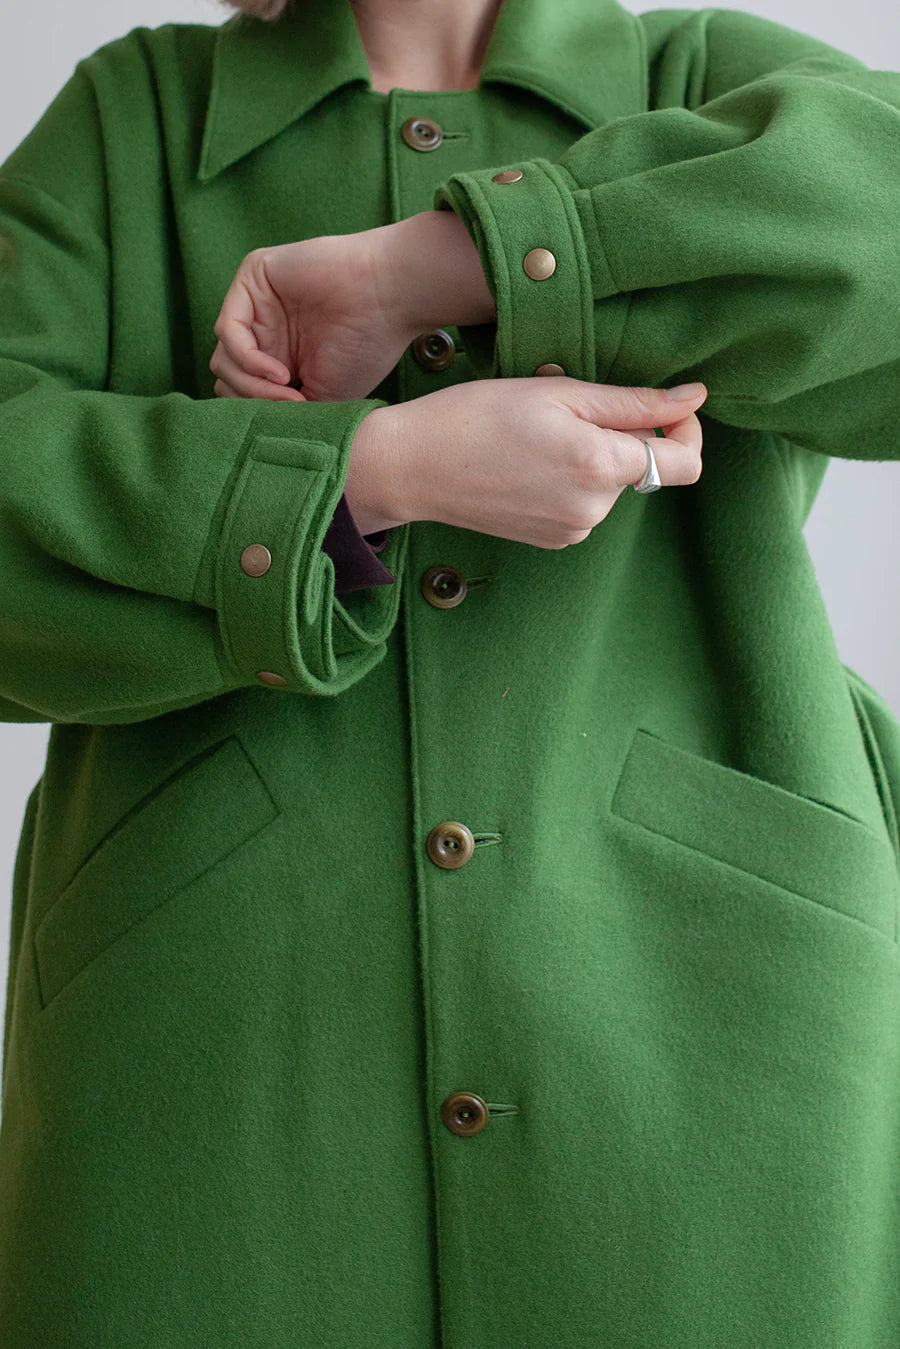 The Modern Sewing Co. Darcy Coat - PDF Pattern